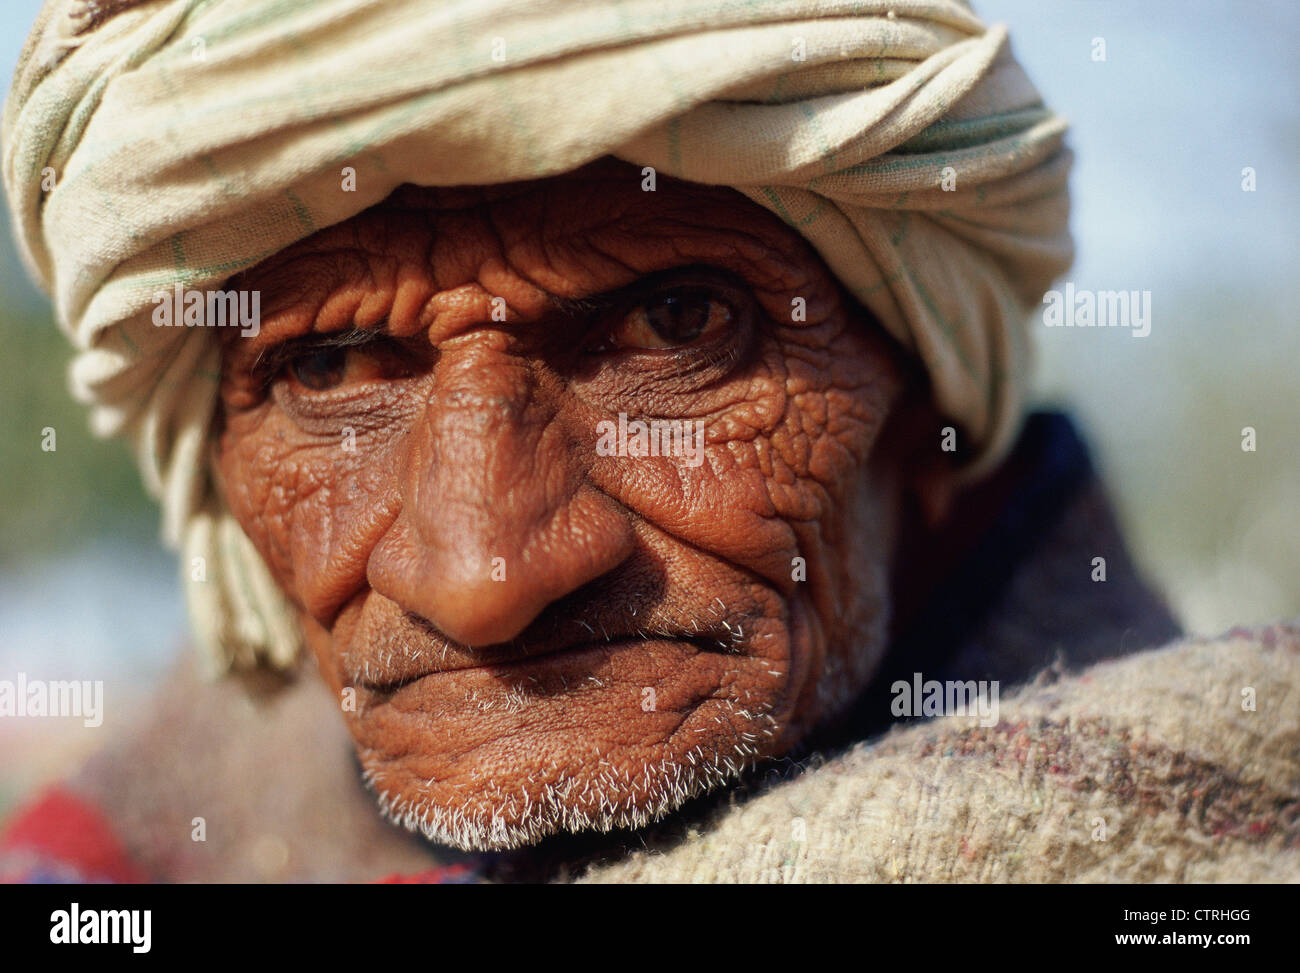 Man belonging to the Bhil tribe ( India) Stock Photo